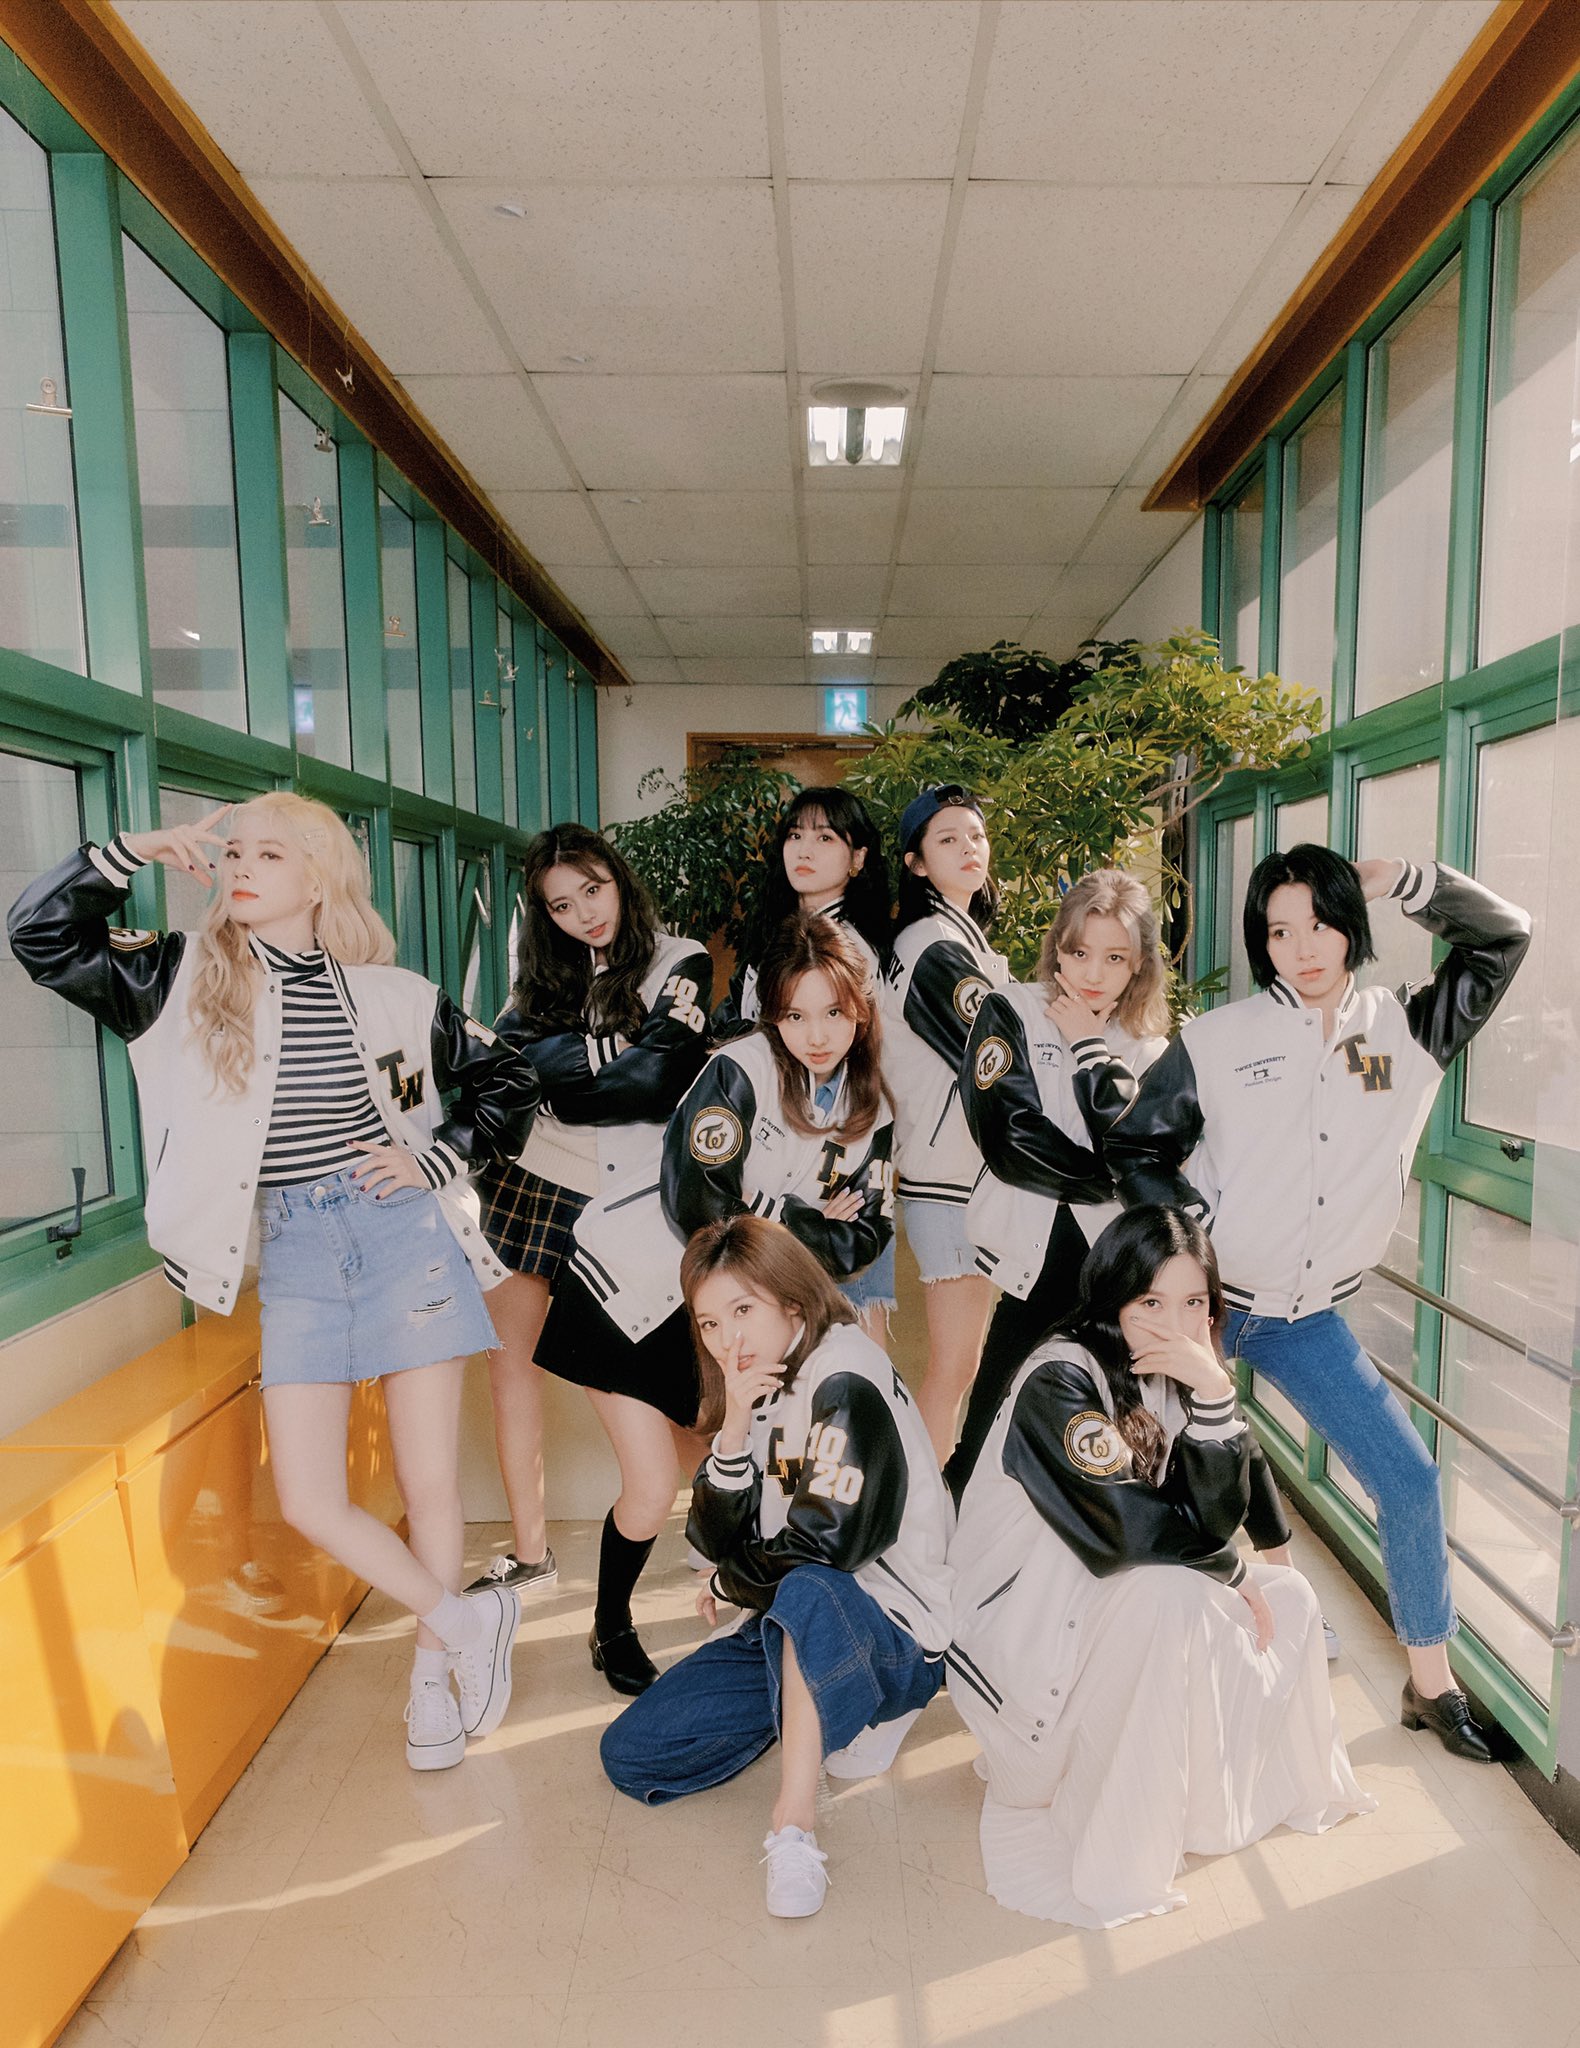 Misa ᴗ The Ot9 Picture They Took For Twicelights In Seoul Finale Twice In Uni Varsity Jackets Is Everything Jypetwice T Co Lmuq2kk5o8